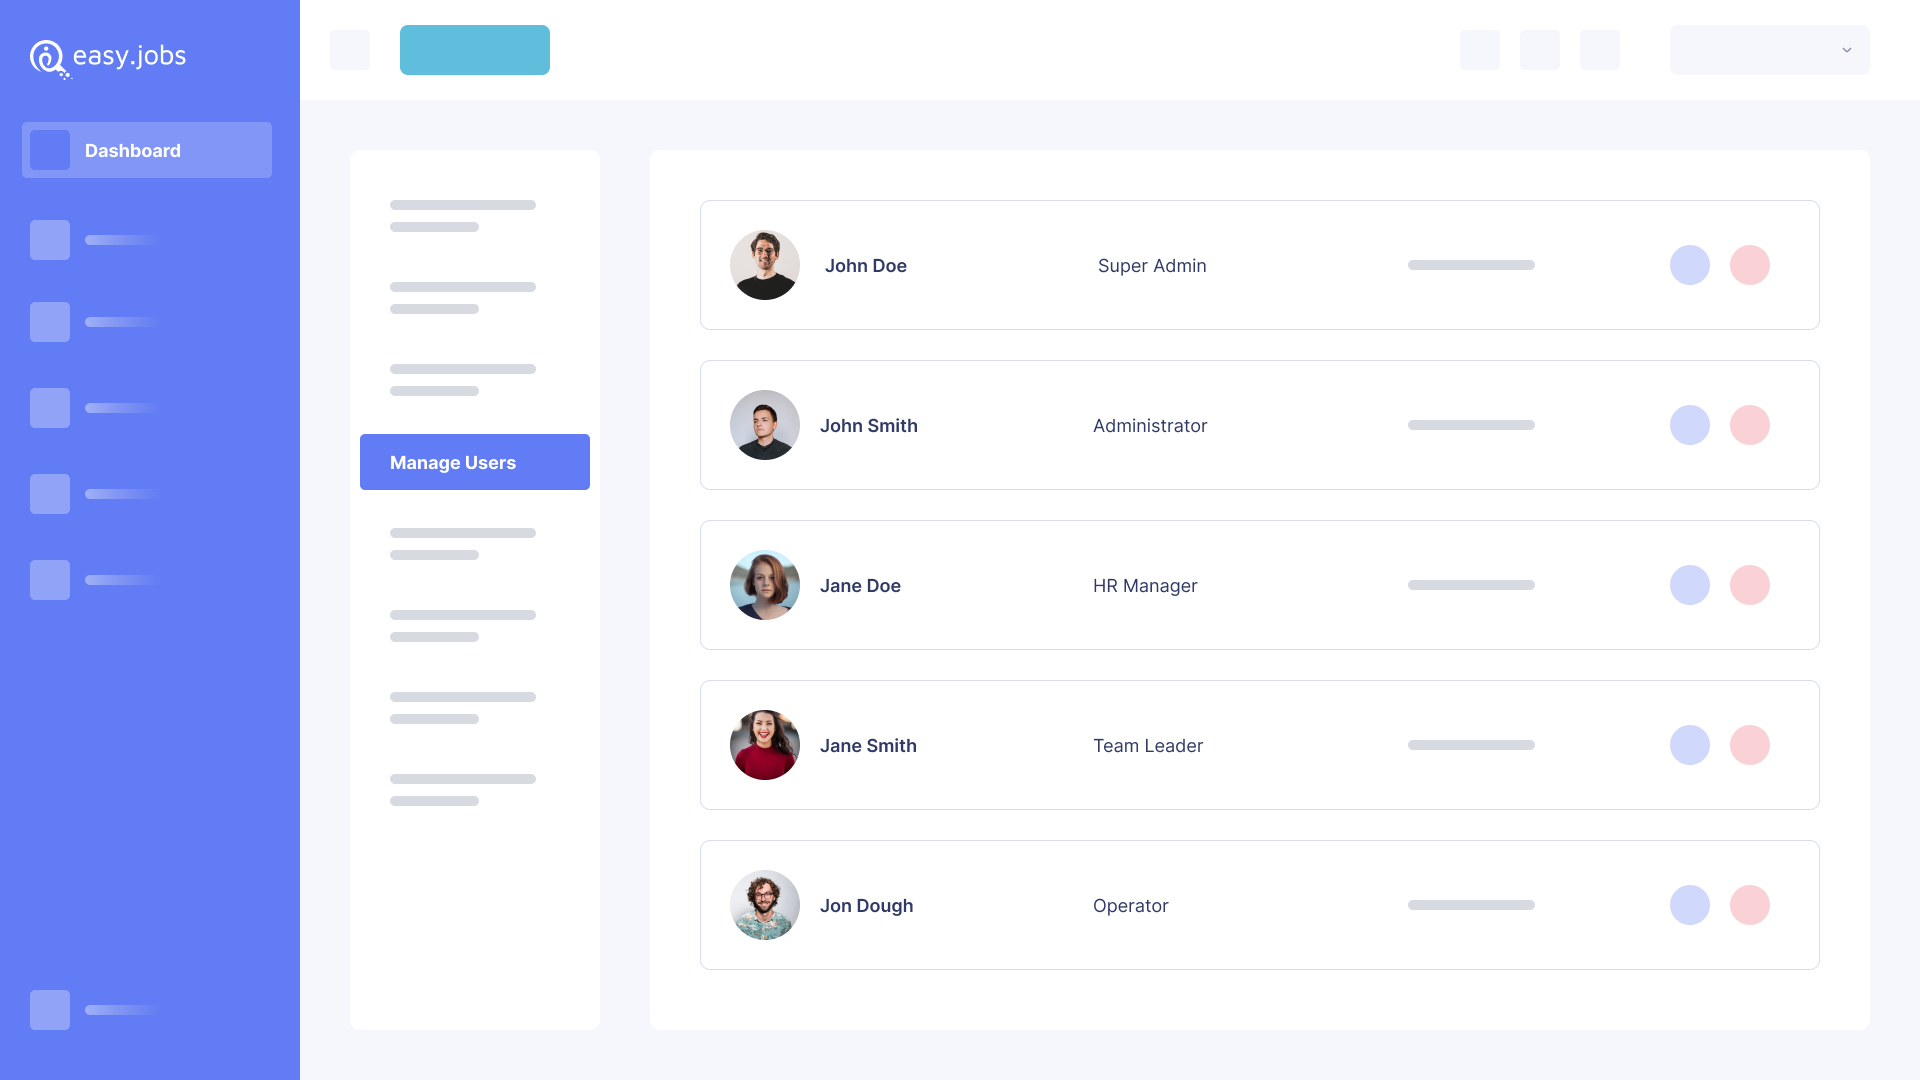 easy.jobs has brought more advanced facilities to let different HR team members work together and smoothen the recruitment process. You can set different user roles and allow permissions individually and more easily.